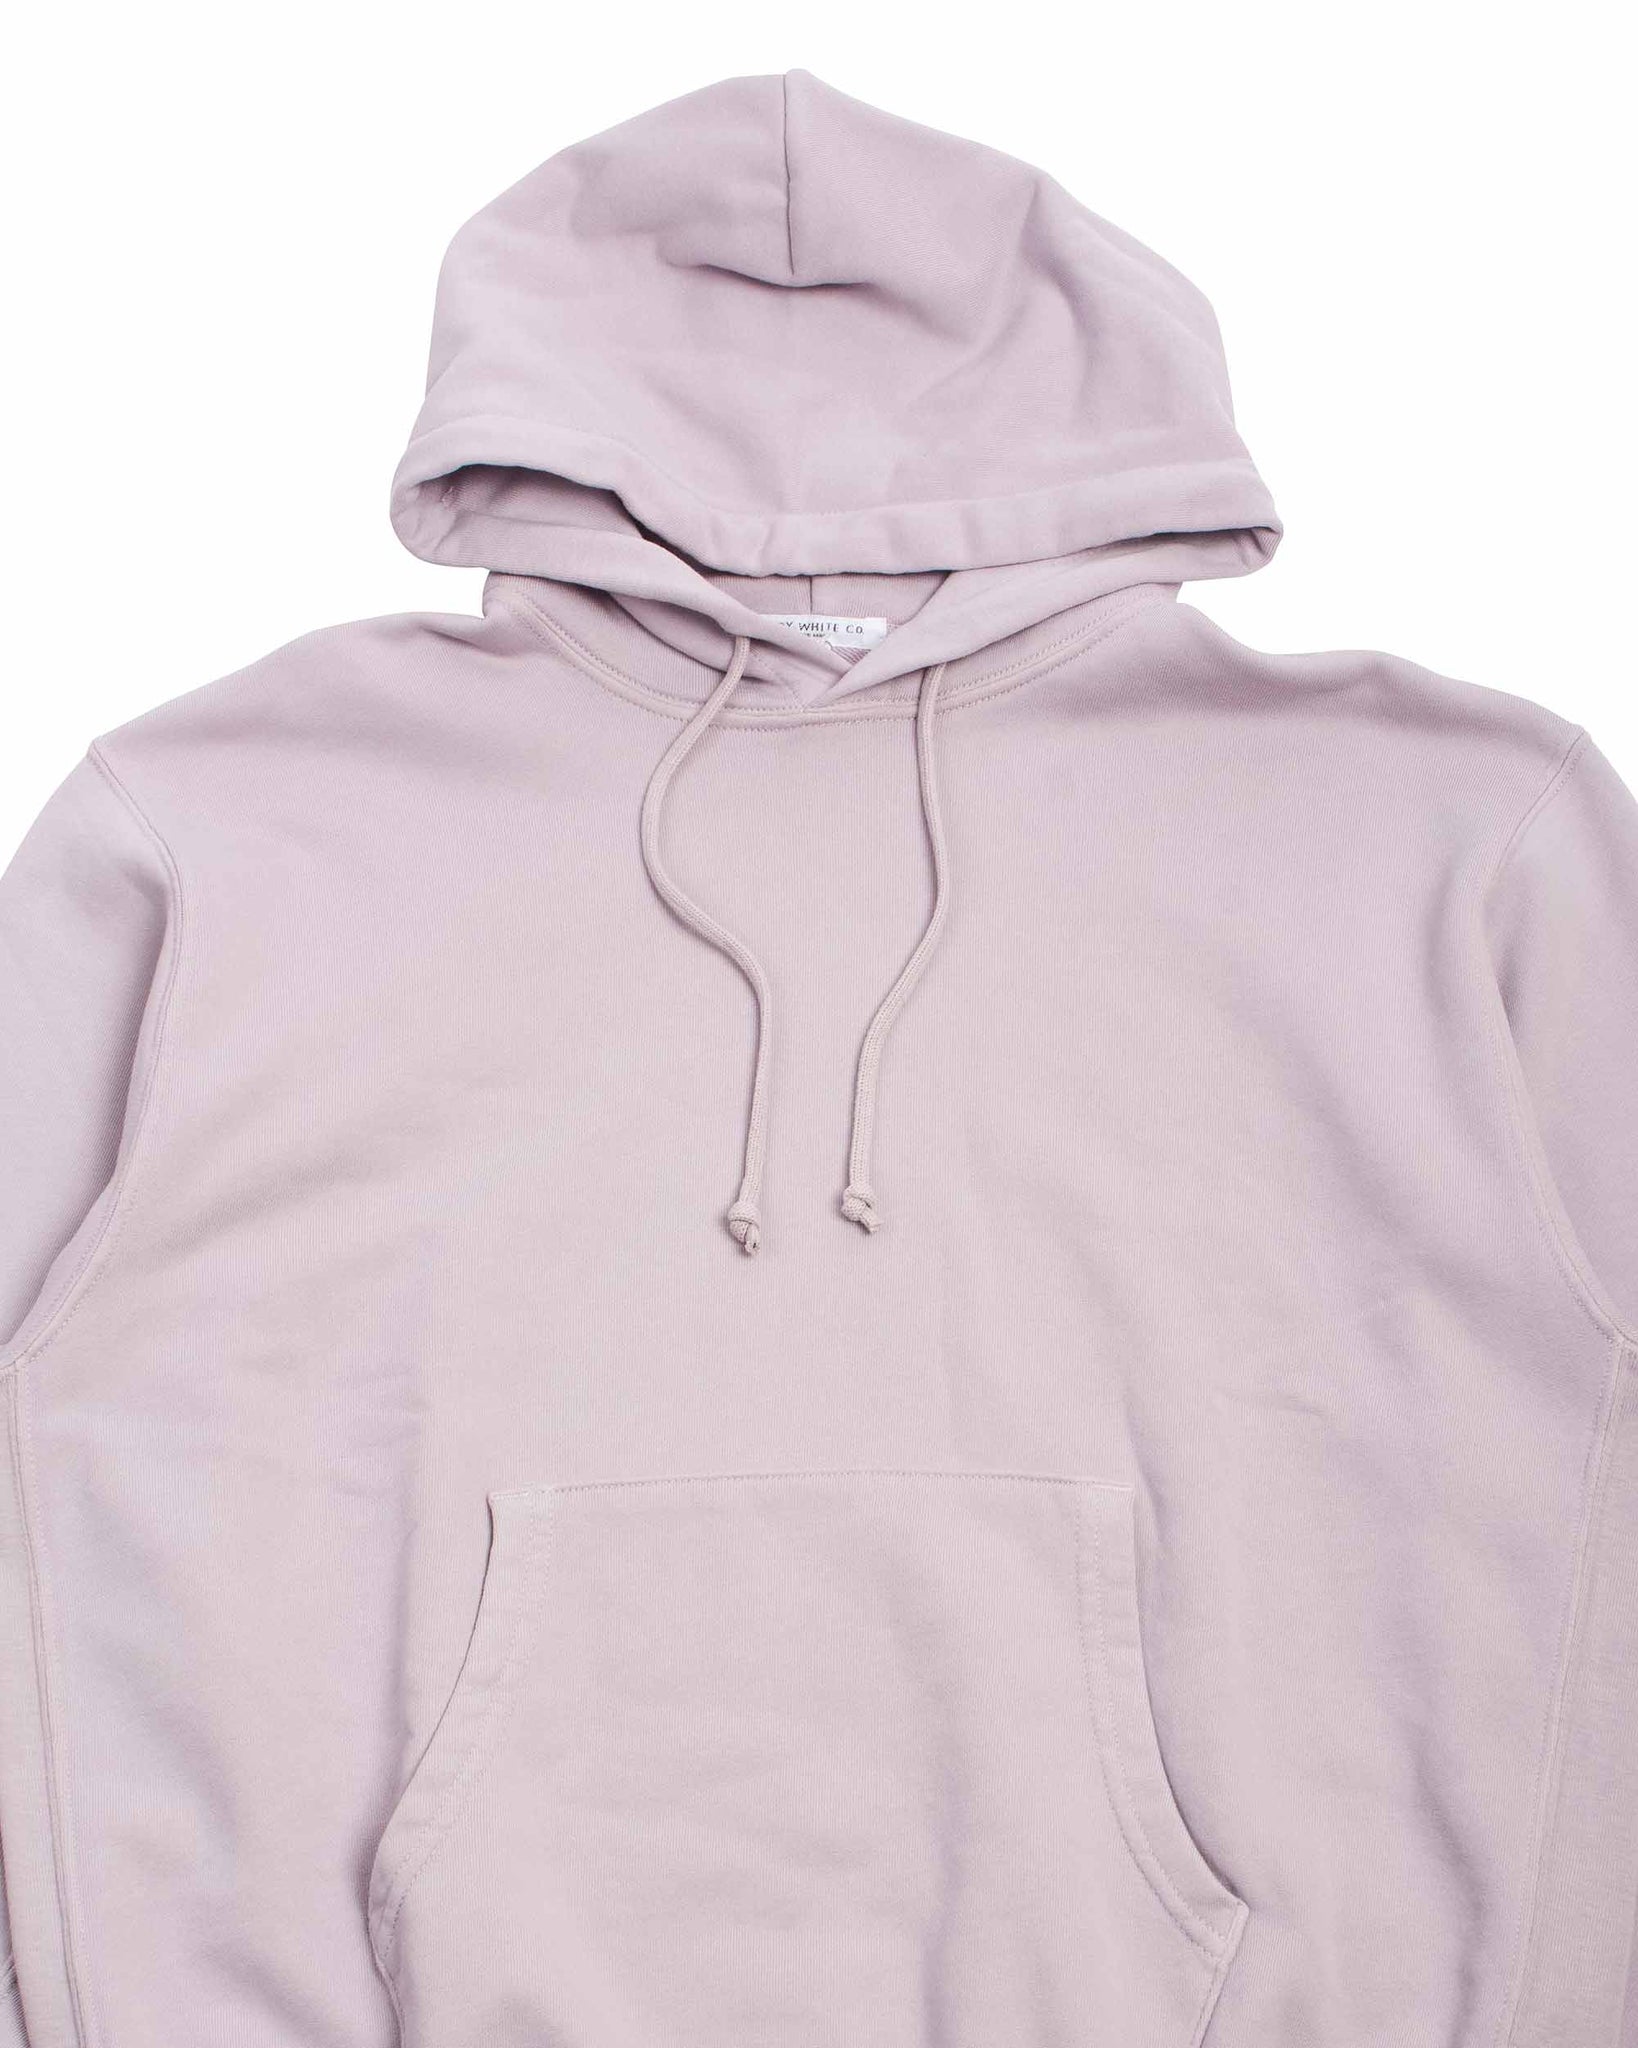 Lady White Co. Classic Fit Hoodie Greyish Mauve Close